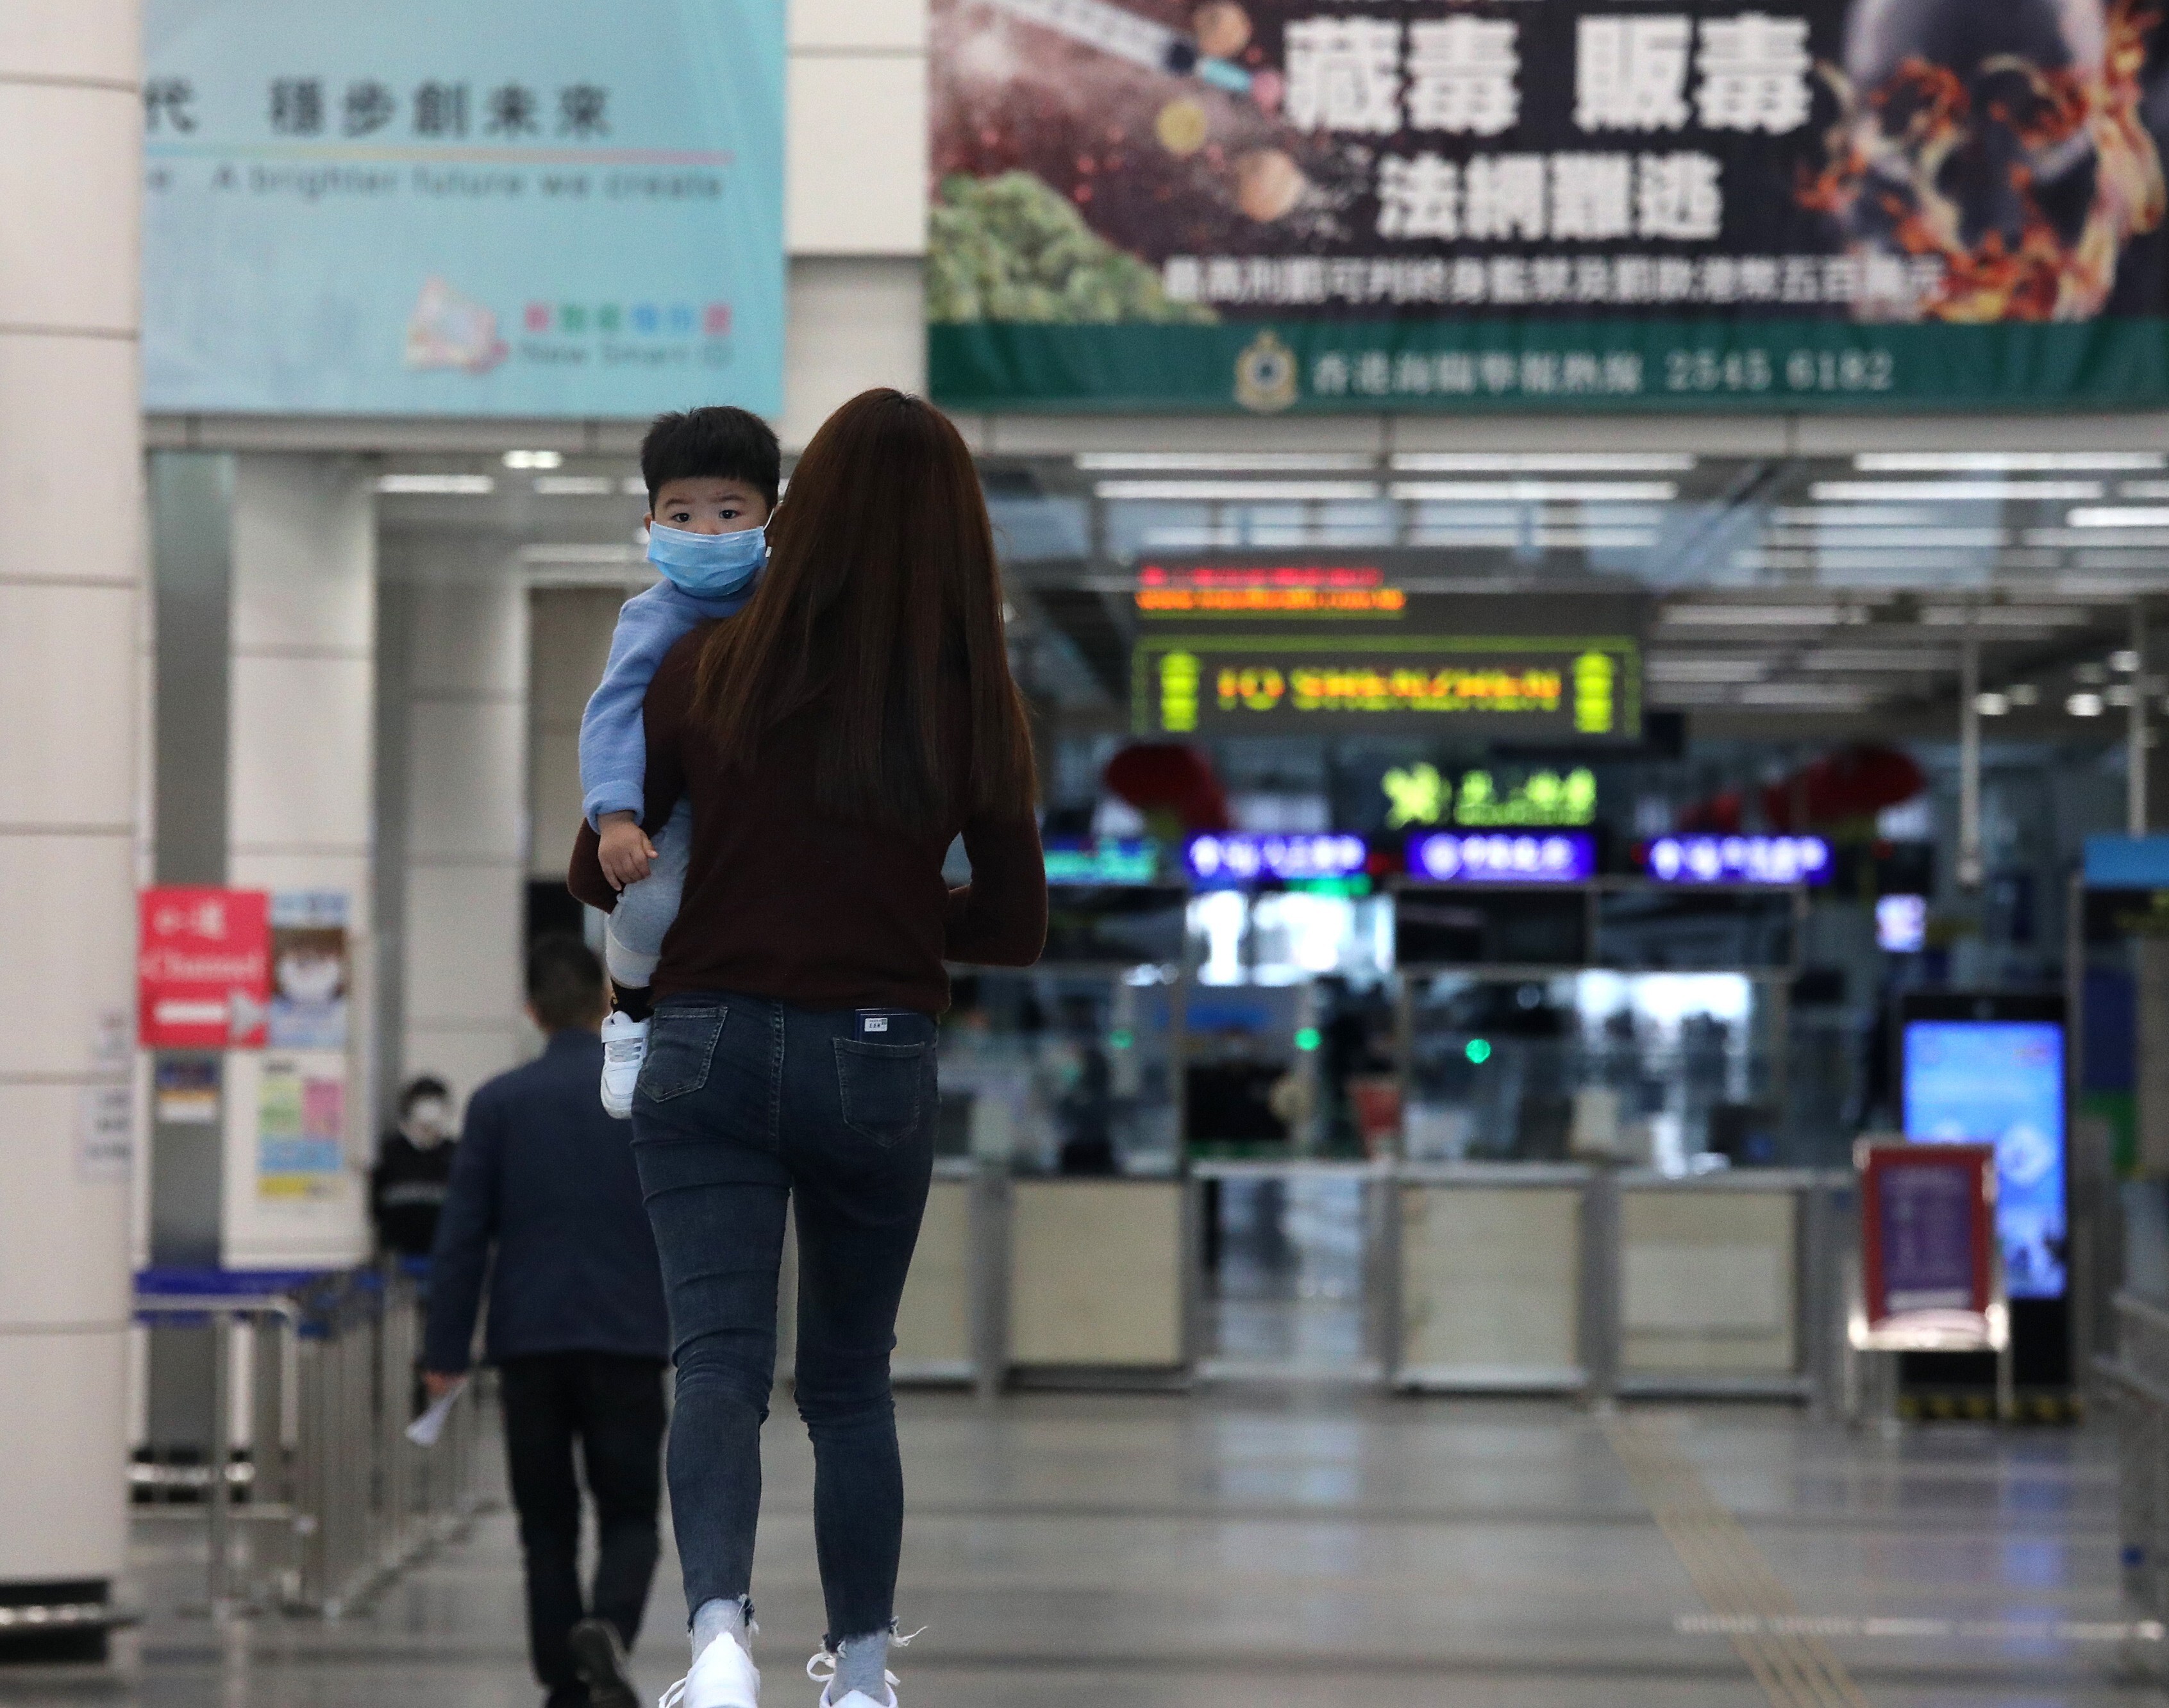 A plan to form a travel bubble between Hong Kong, Macau and Guangdong province has stalled. Photo: Felix Wong